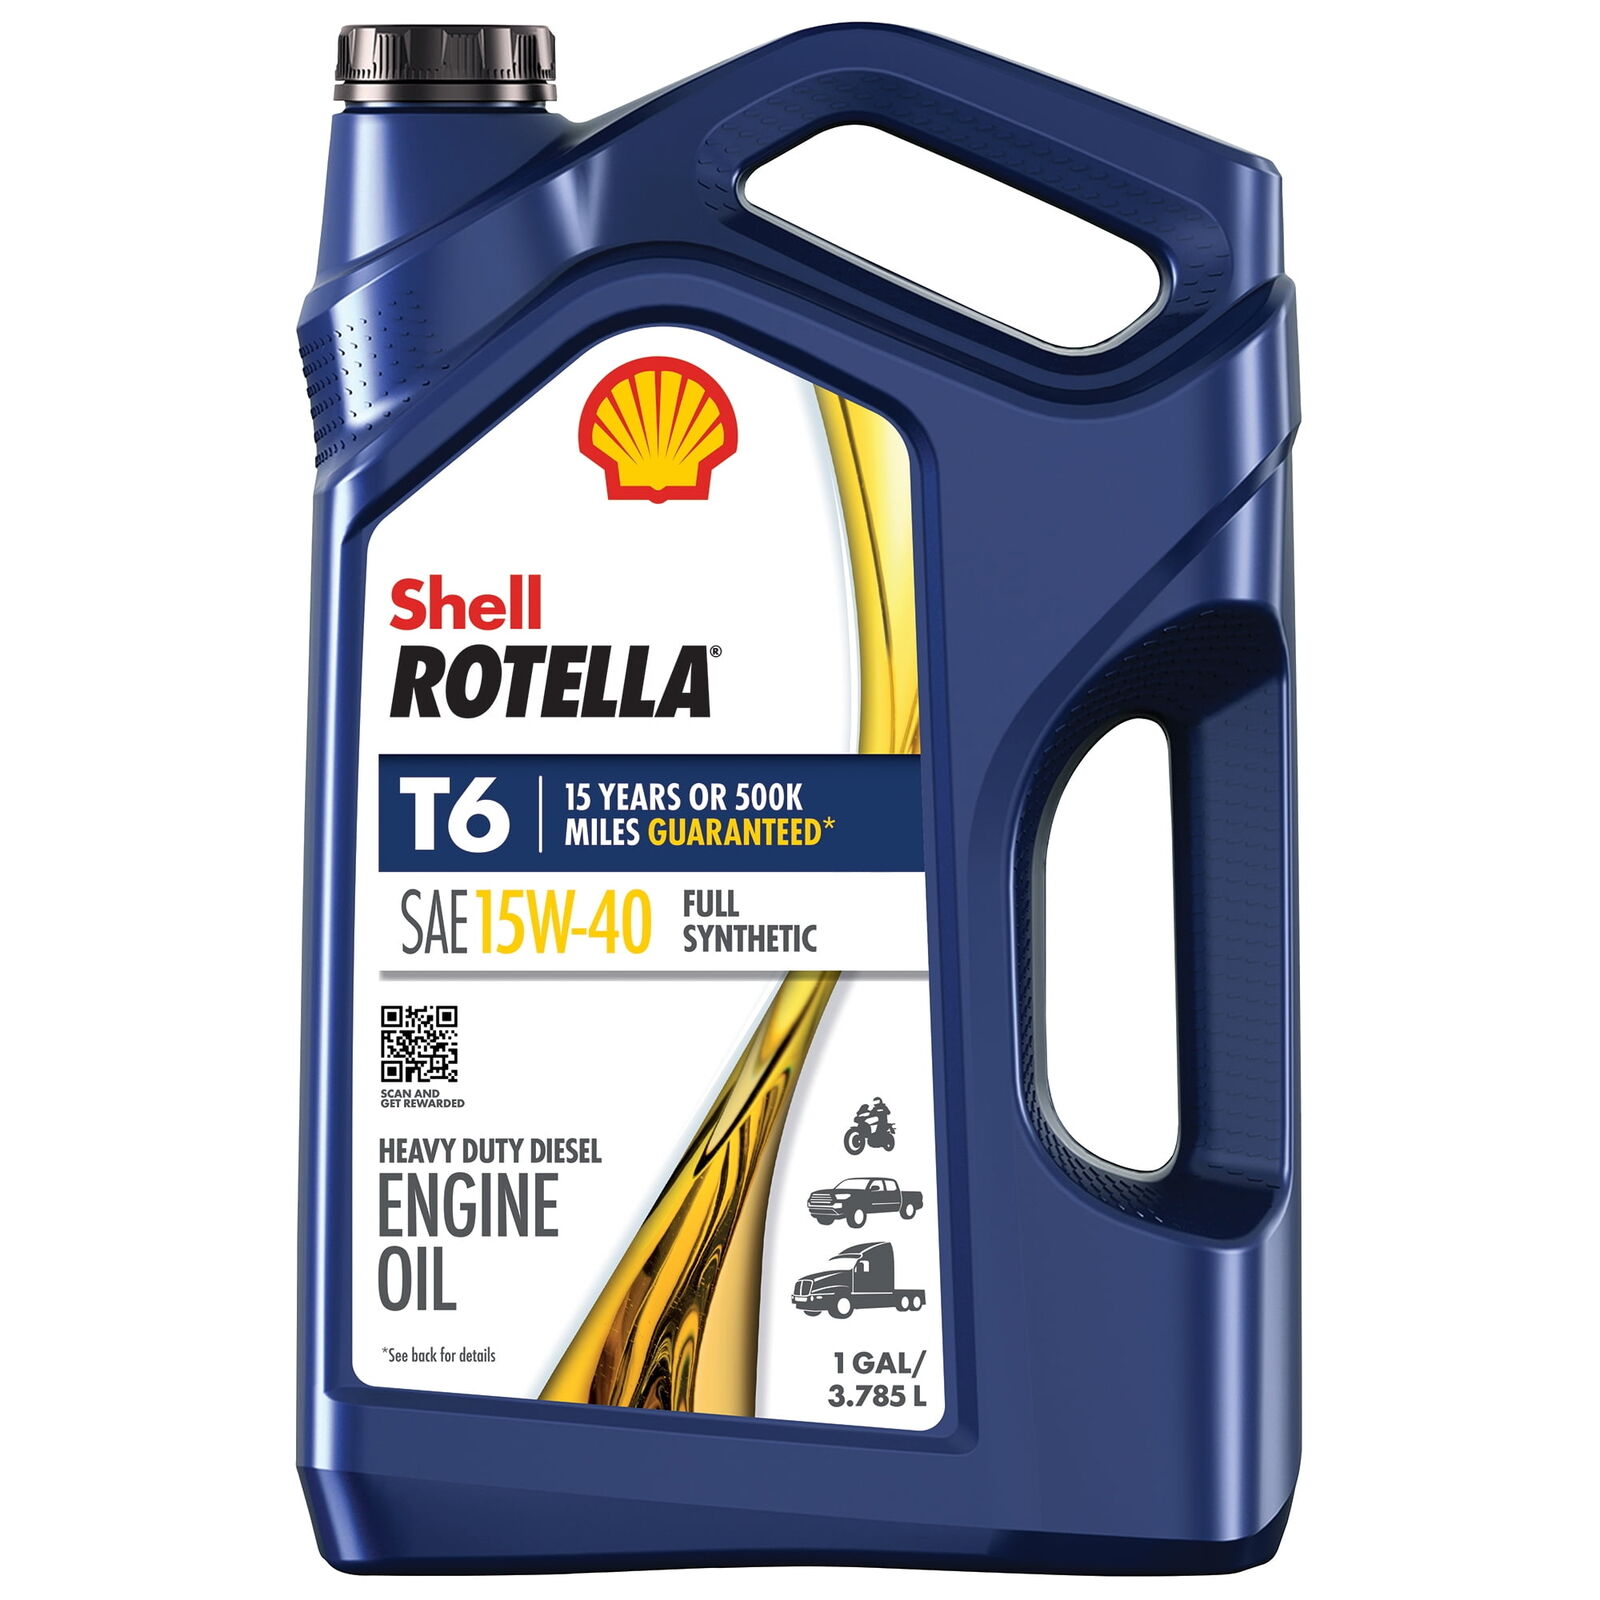  T6 Full Synthetic 15W-40 Diesel Engine Oil, 1 Gallon